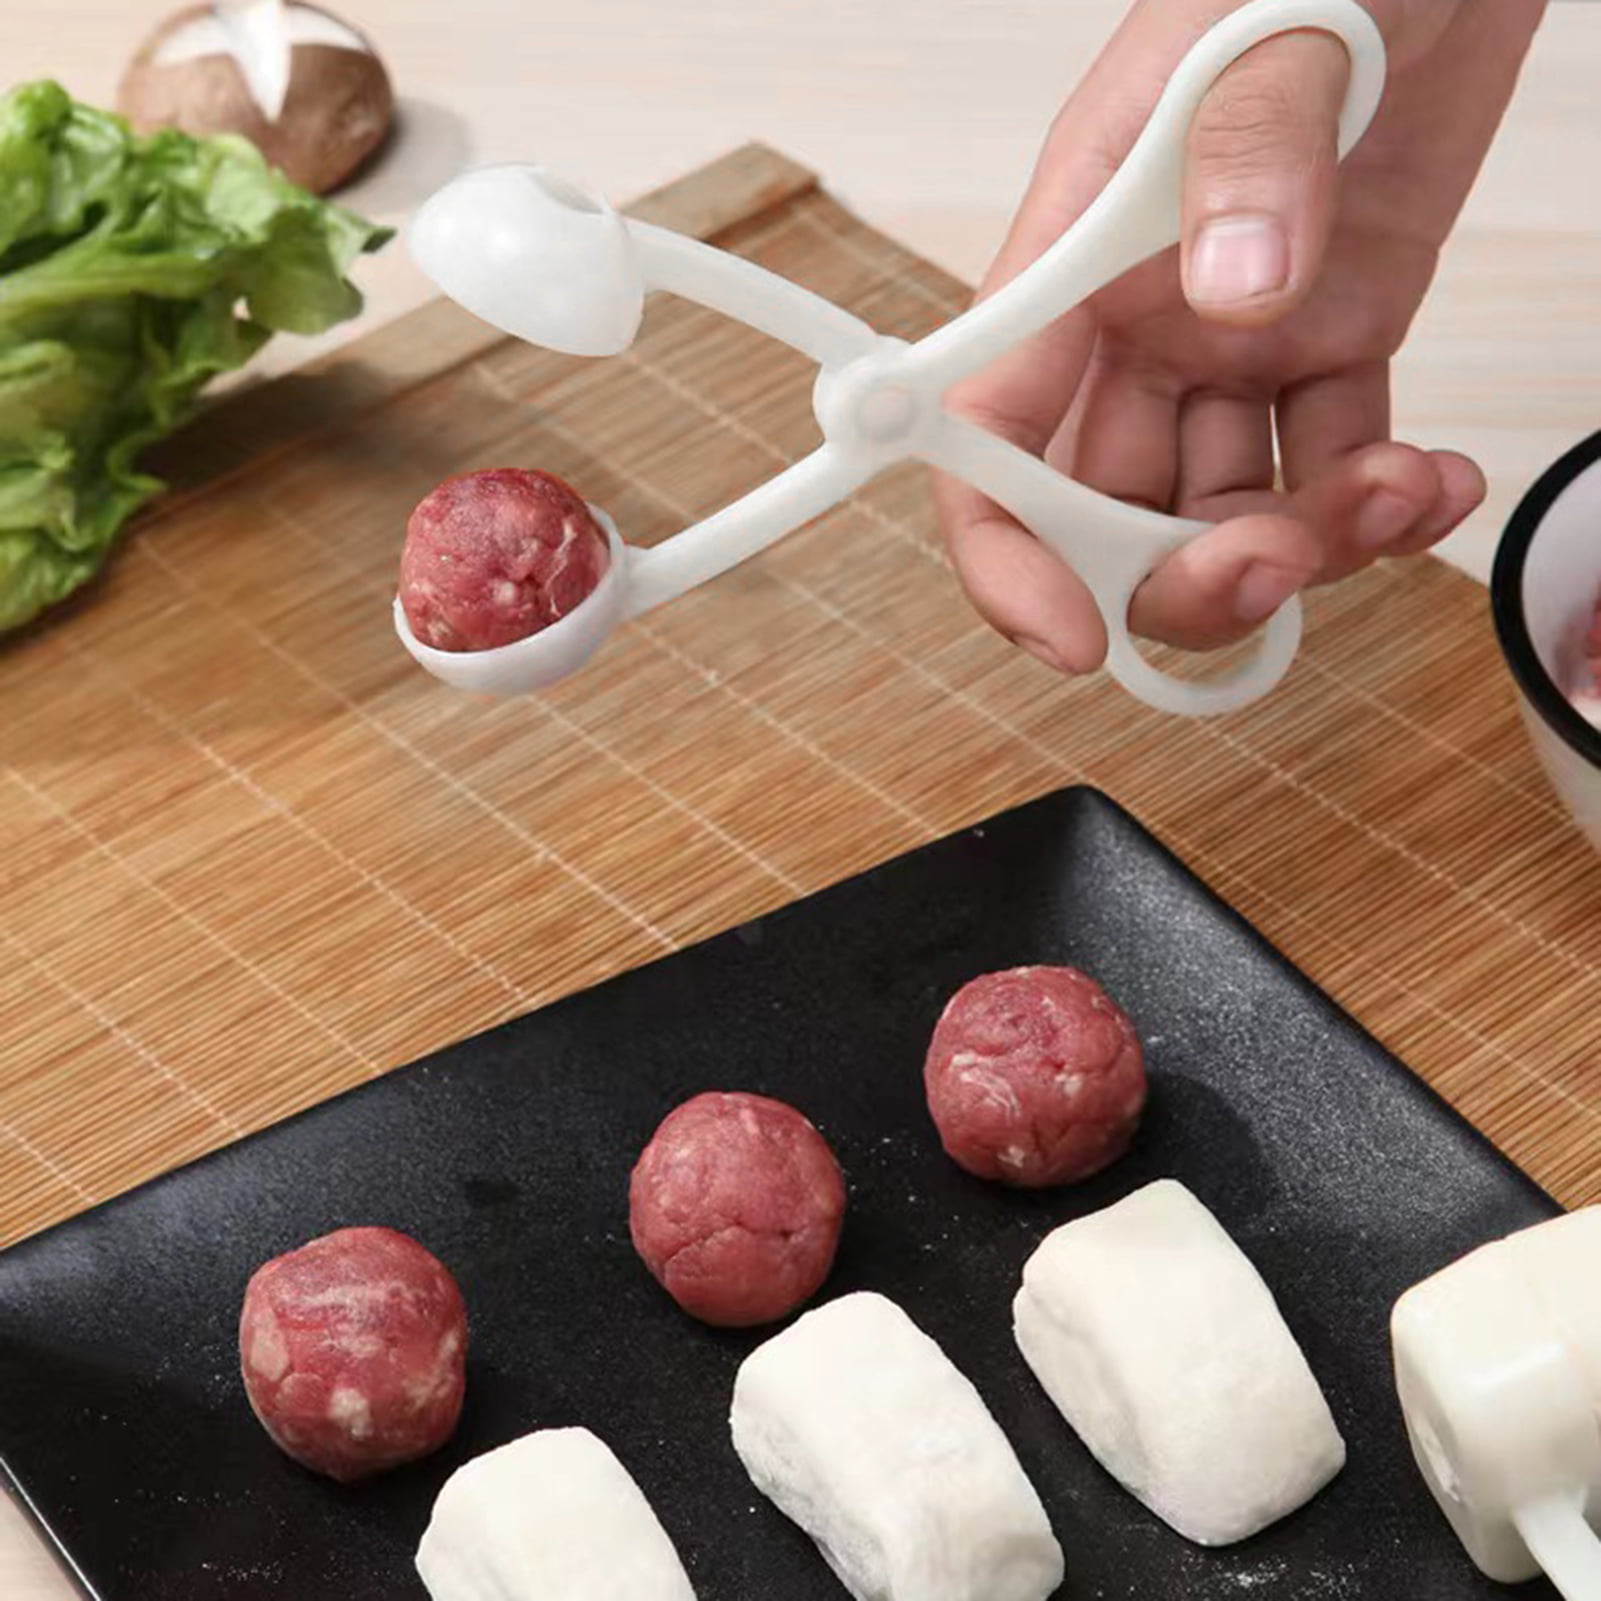 Herchr Meatball Master Meatball Maker Meatball Tray 12 Grids Meatball Maker Meatball Press Meatball Mold Meatballer Meat Ball Making Kitchen DIY Cooking